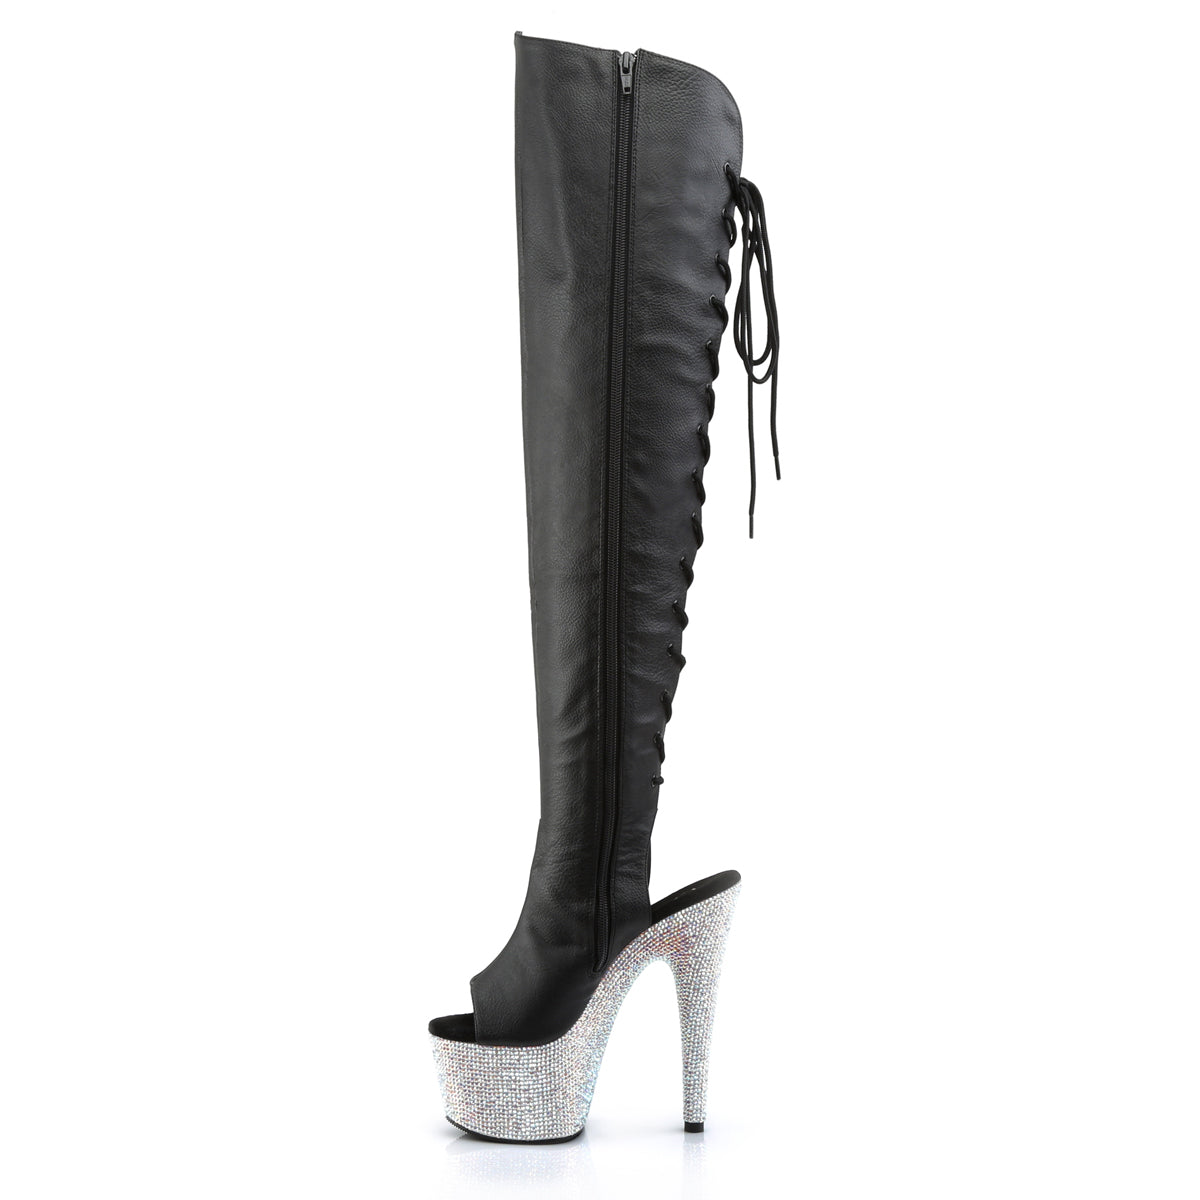 BEJEWELED-3019DM-7 Silver & Black Thigh High Peep Toe Boots Silver & Black Multi view 4